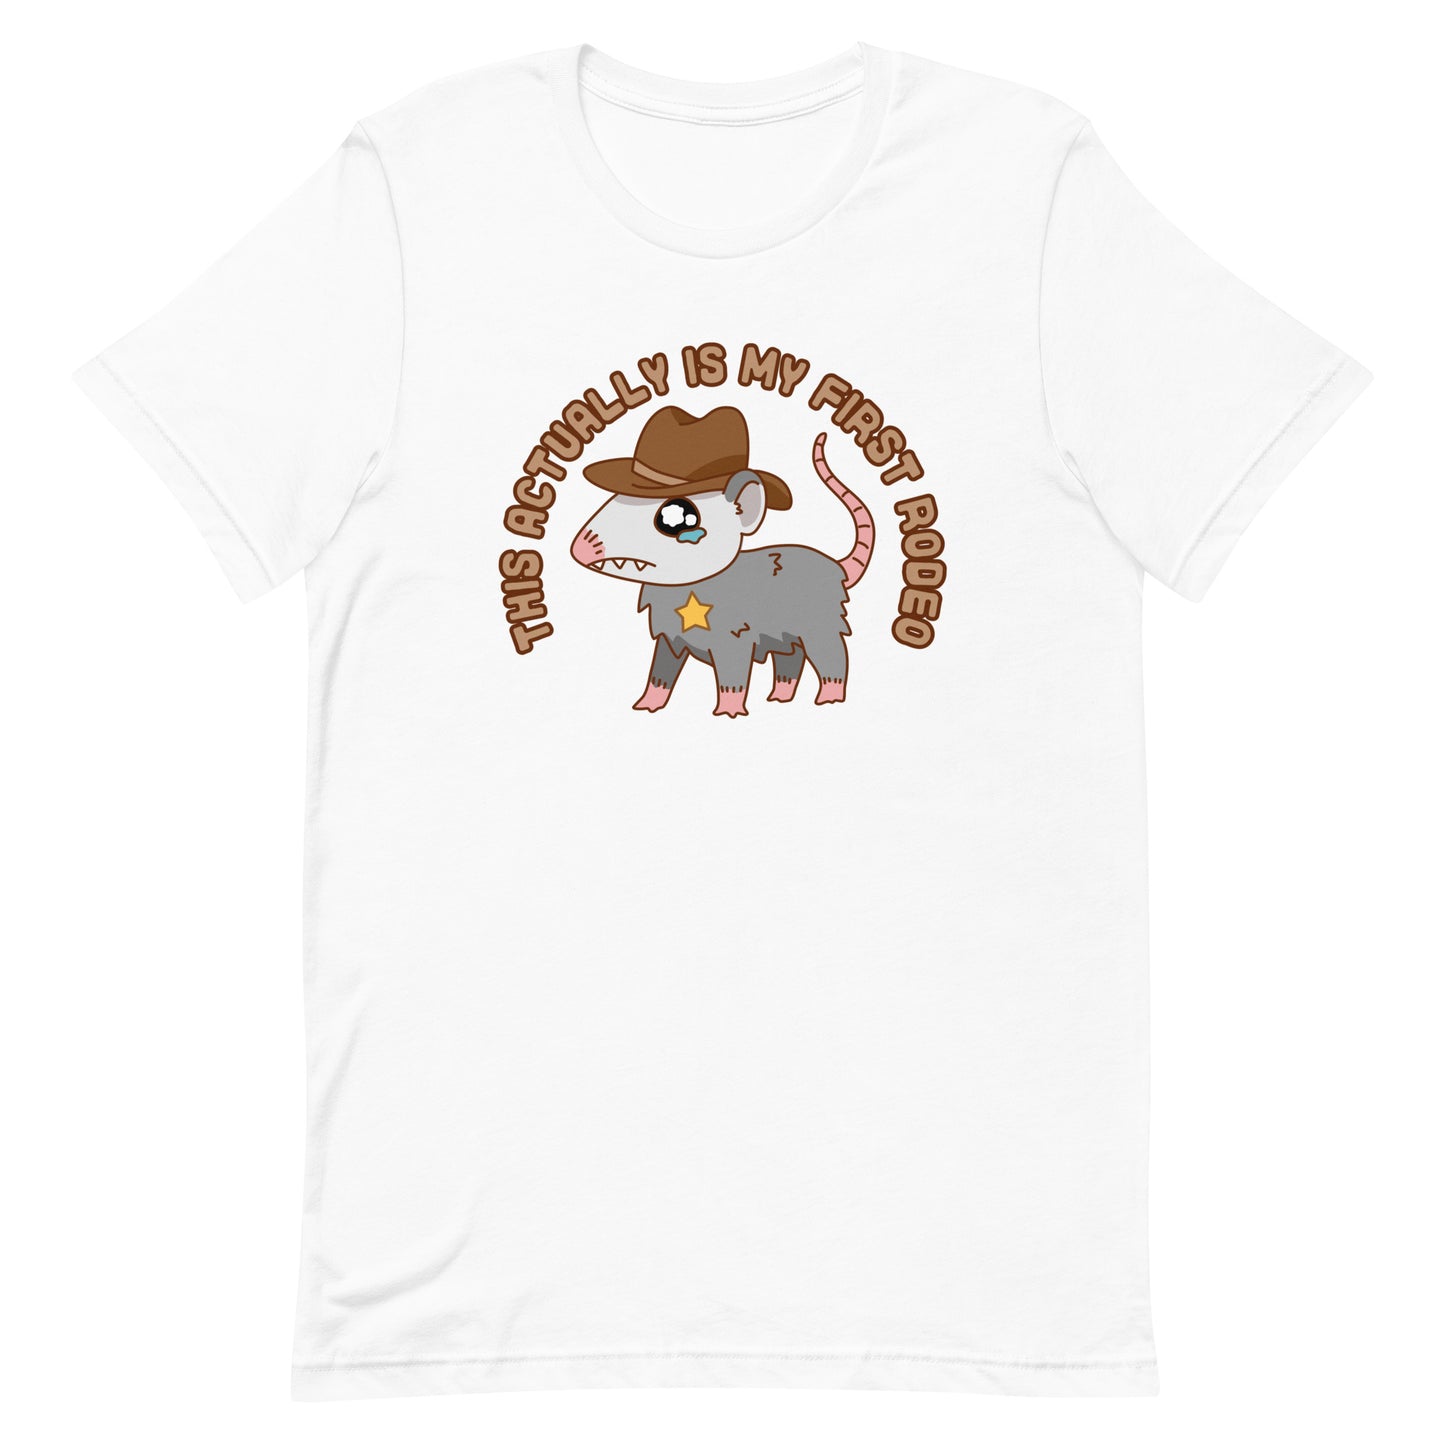 A white crewneck t-shirt featuring an illustration of a cute and nervous possum wearing a cowboy hat and sherrif's star badge. Text above the possum in an arc reads "this actually is my first rodeo".